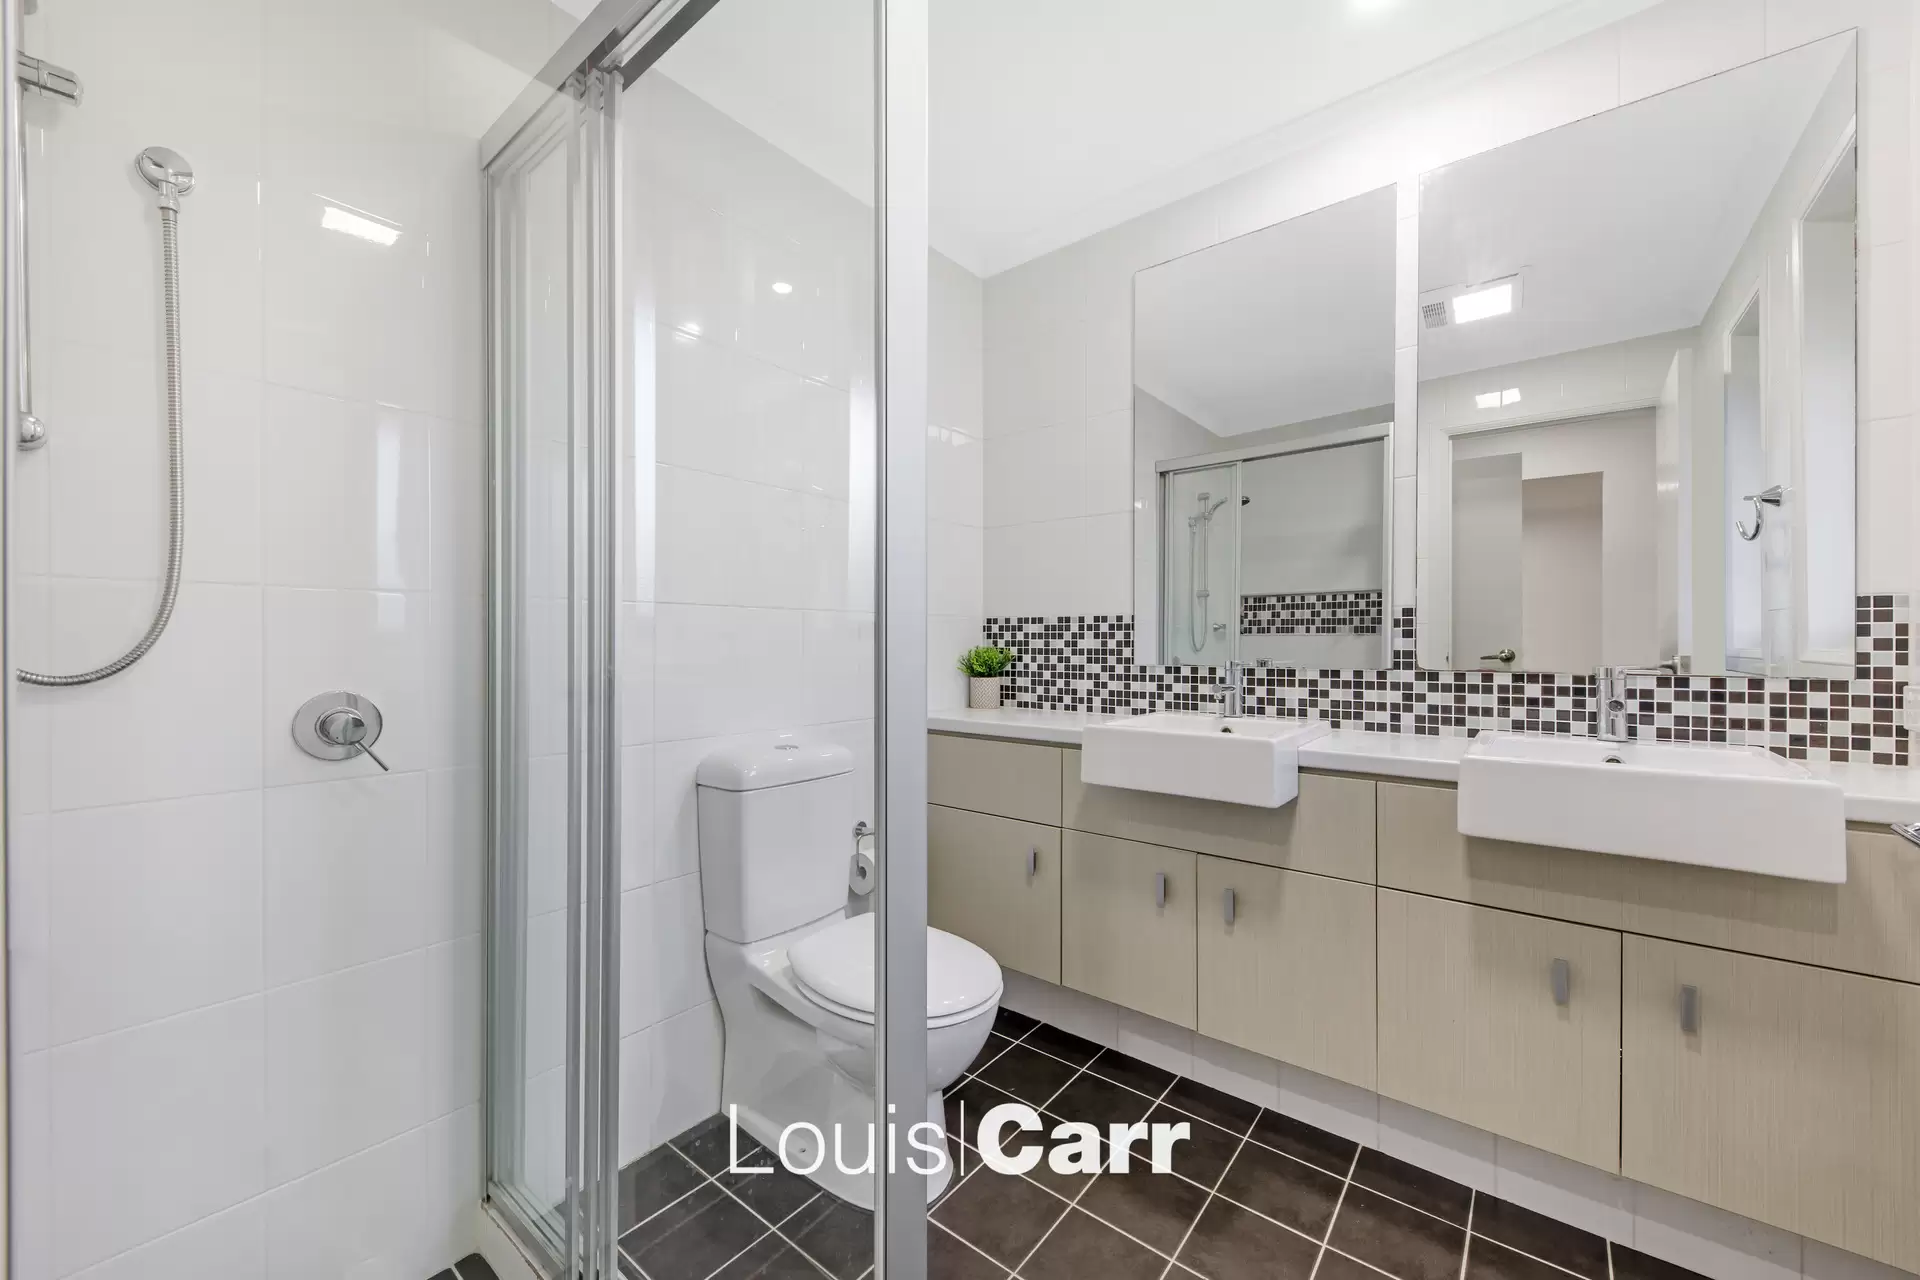 Photo #10: 9 Freshwater Road, Rouse Hill - For Sale by Louis Carr Real Estate